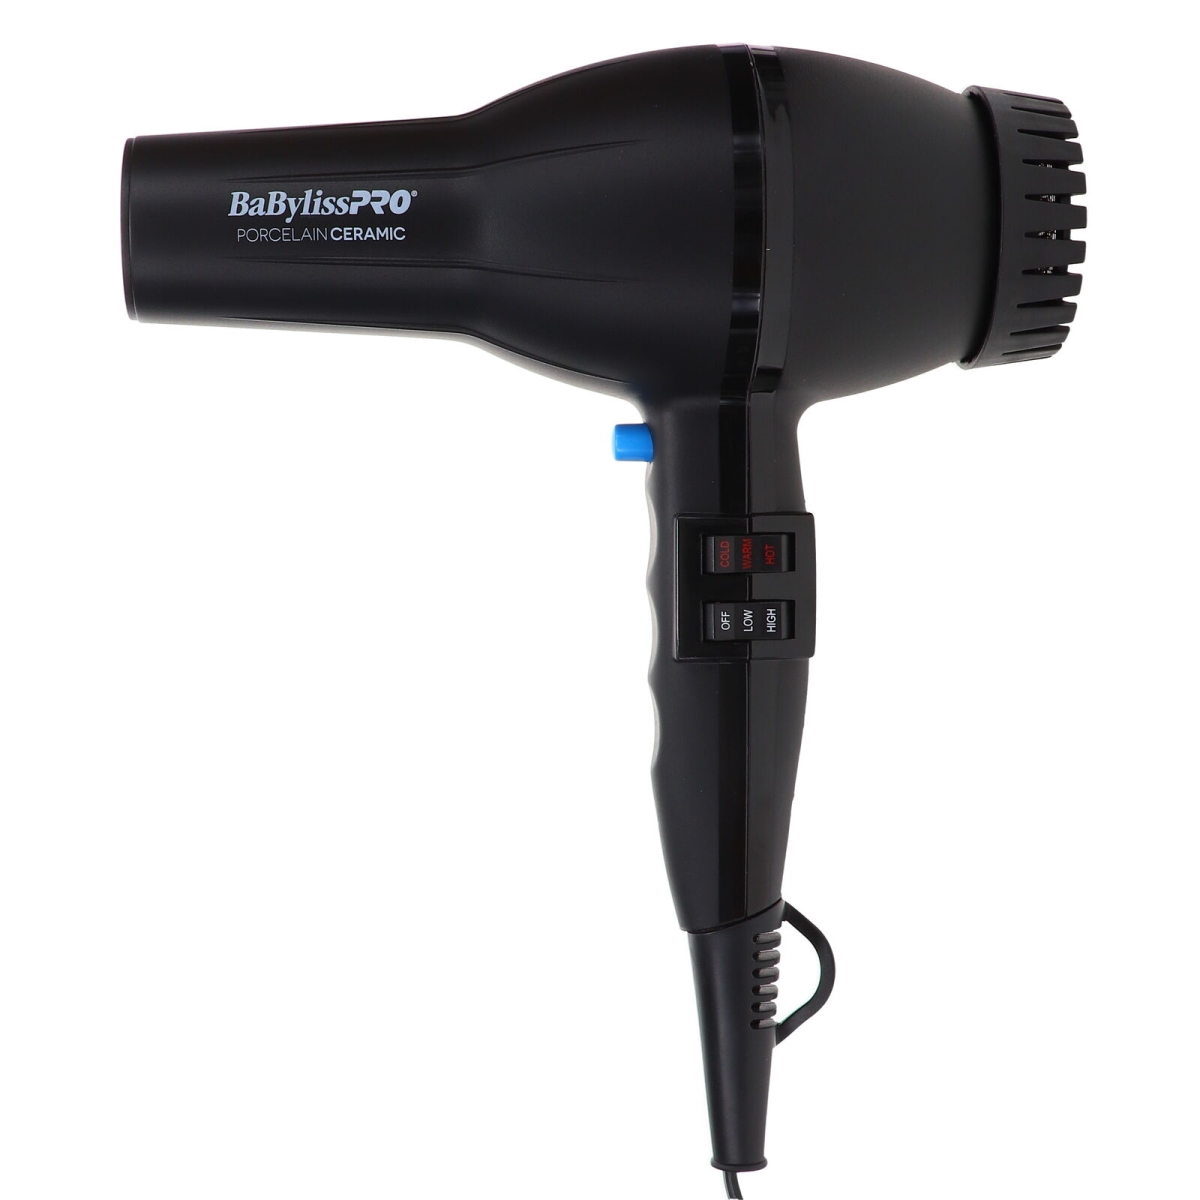 Picture of Conair BP2800N 2000 watts Babyliss Pro Porcelain Ceramic Hair Dryer